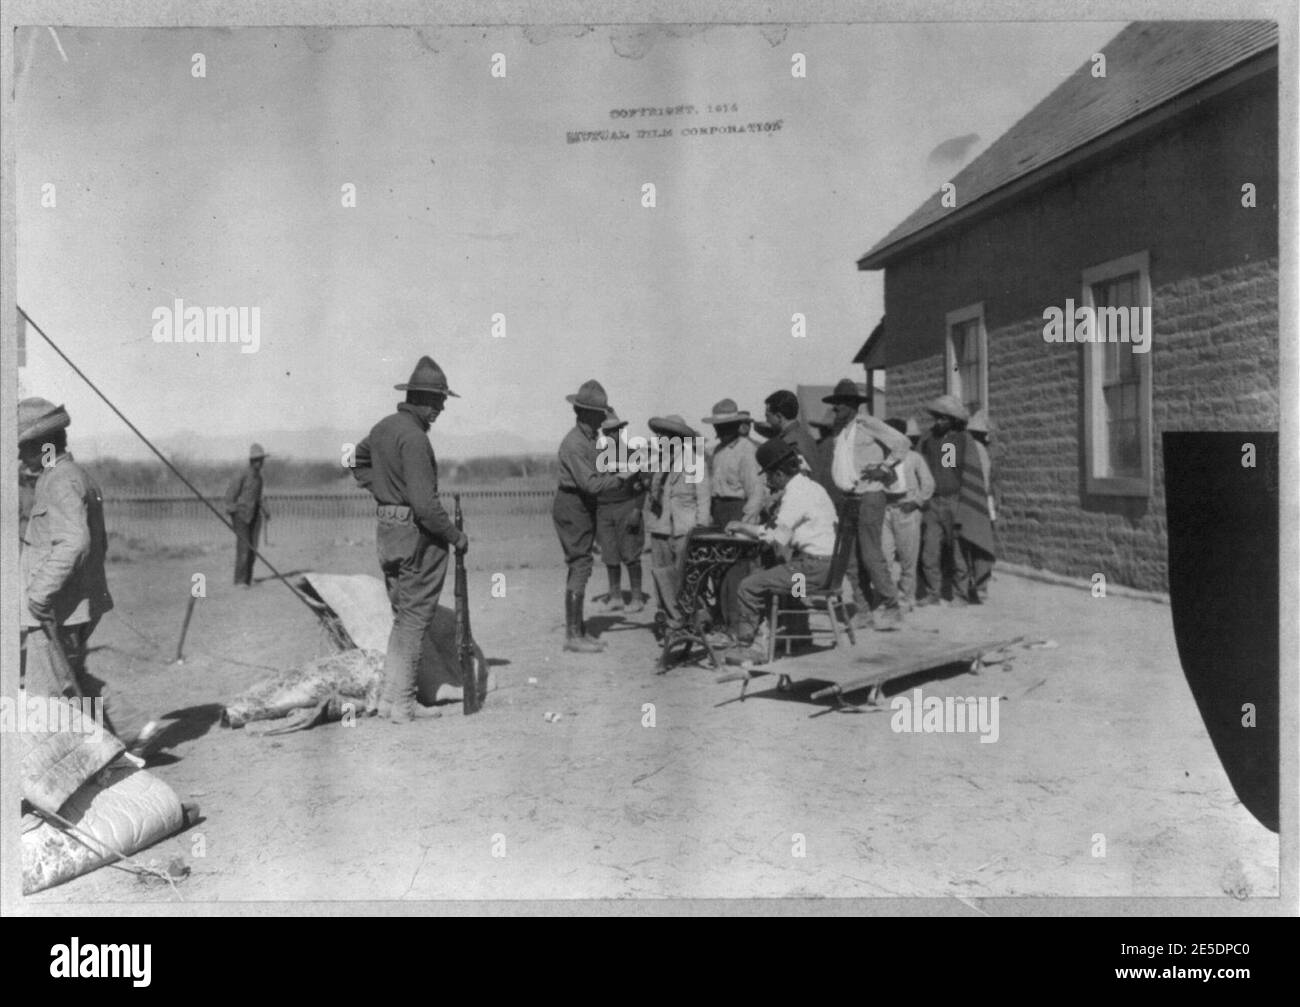 Mexican War, 1914- U.S. soldiers interviewing Mexican refugees; man wearing bowler hat and Red Cross armband seated in center Stock Photo